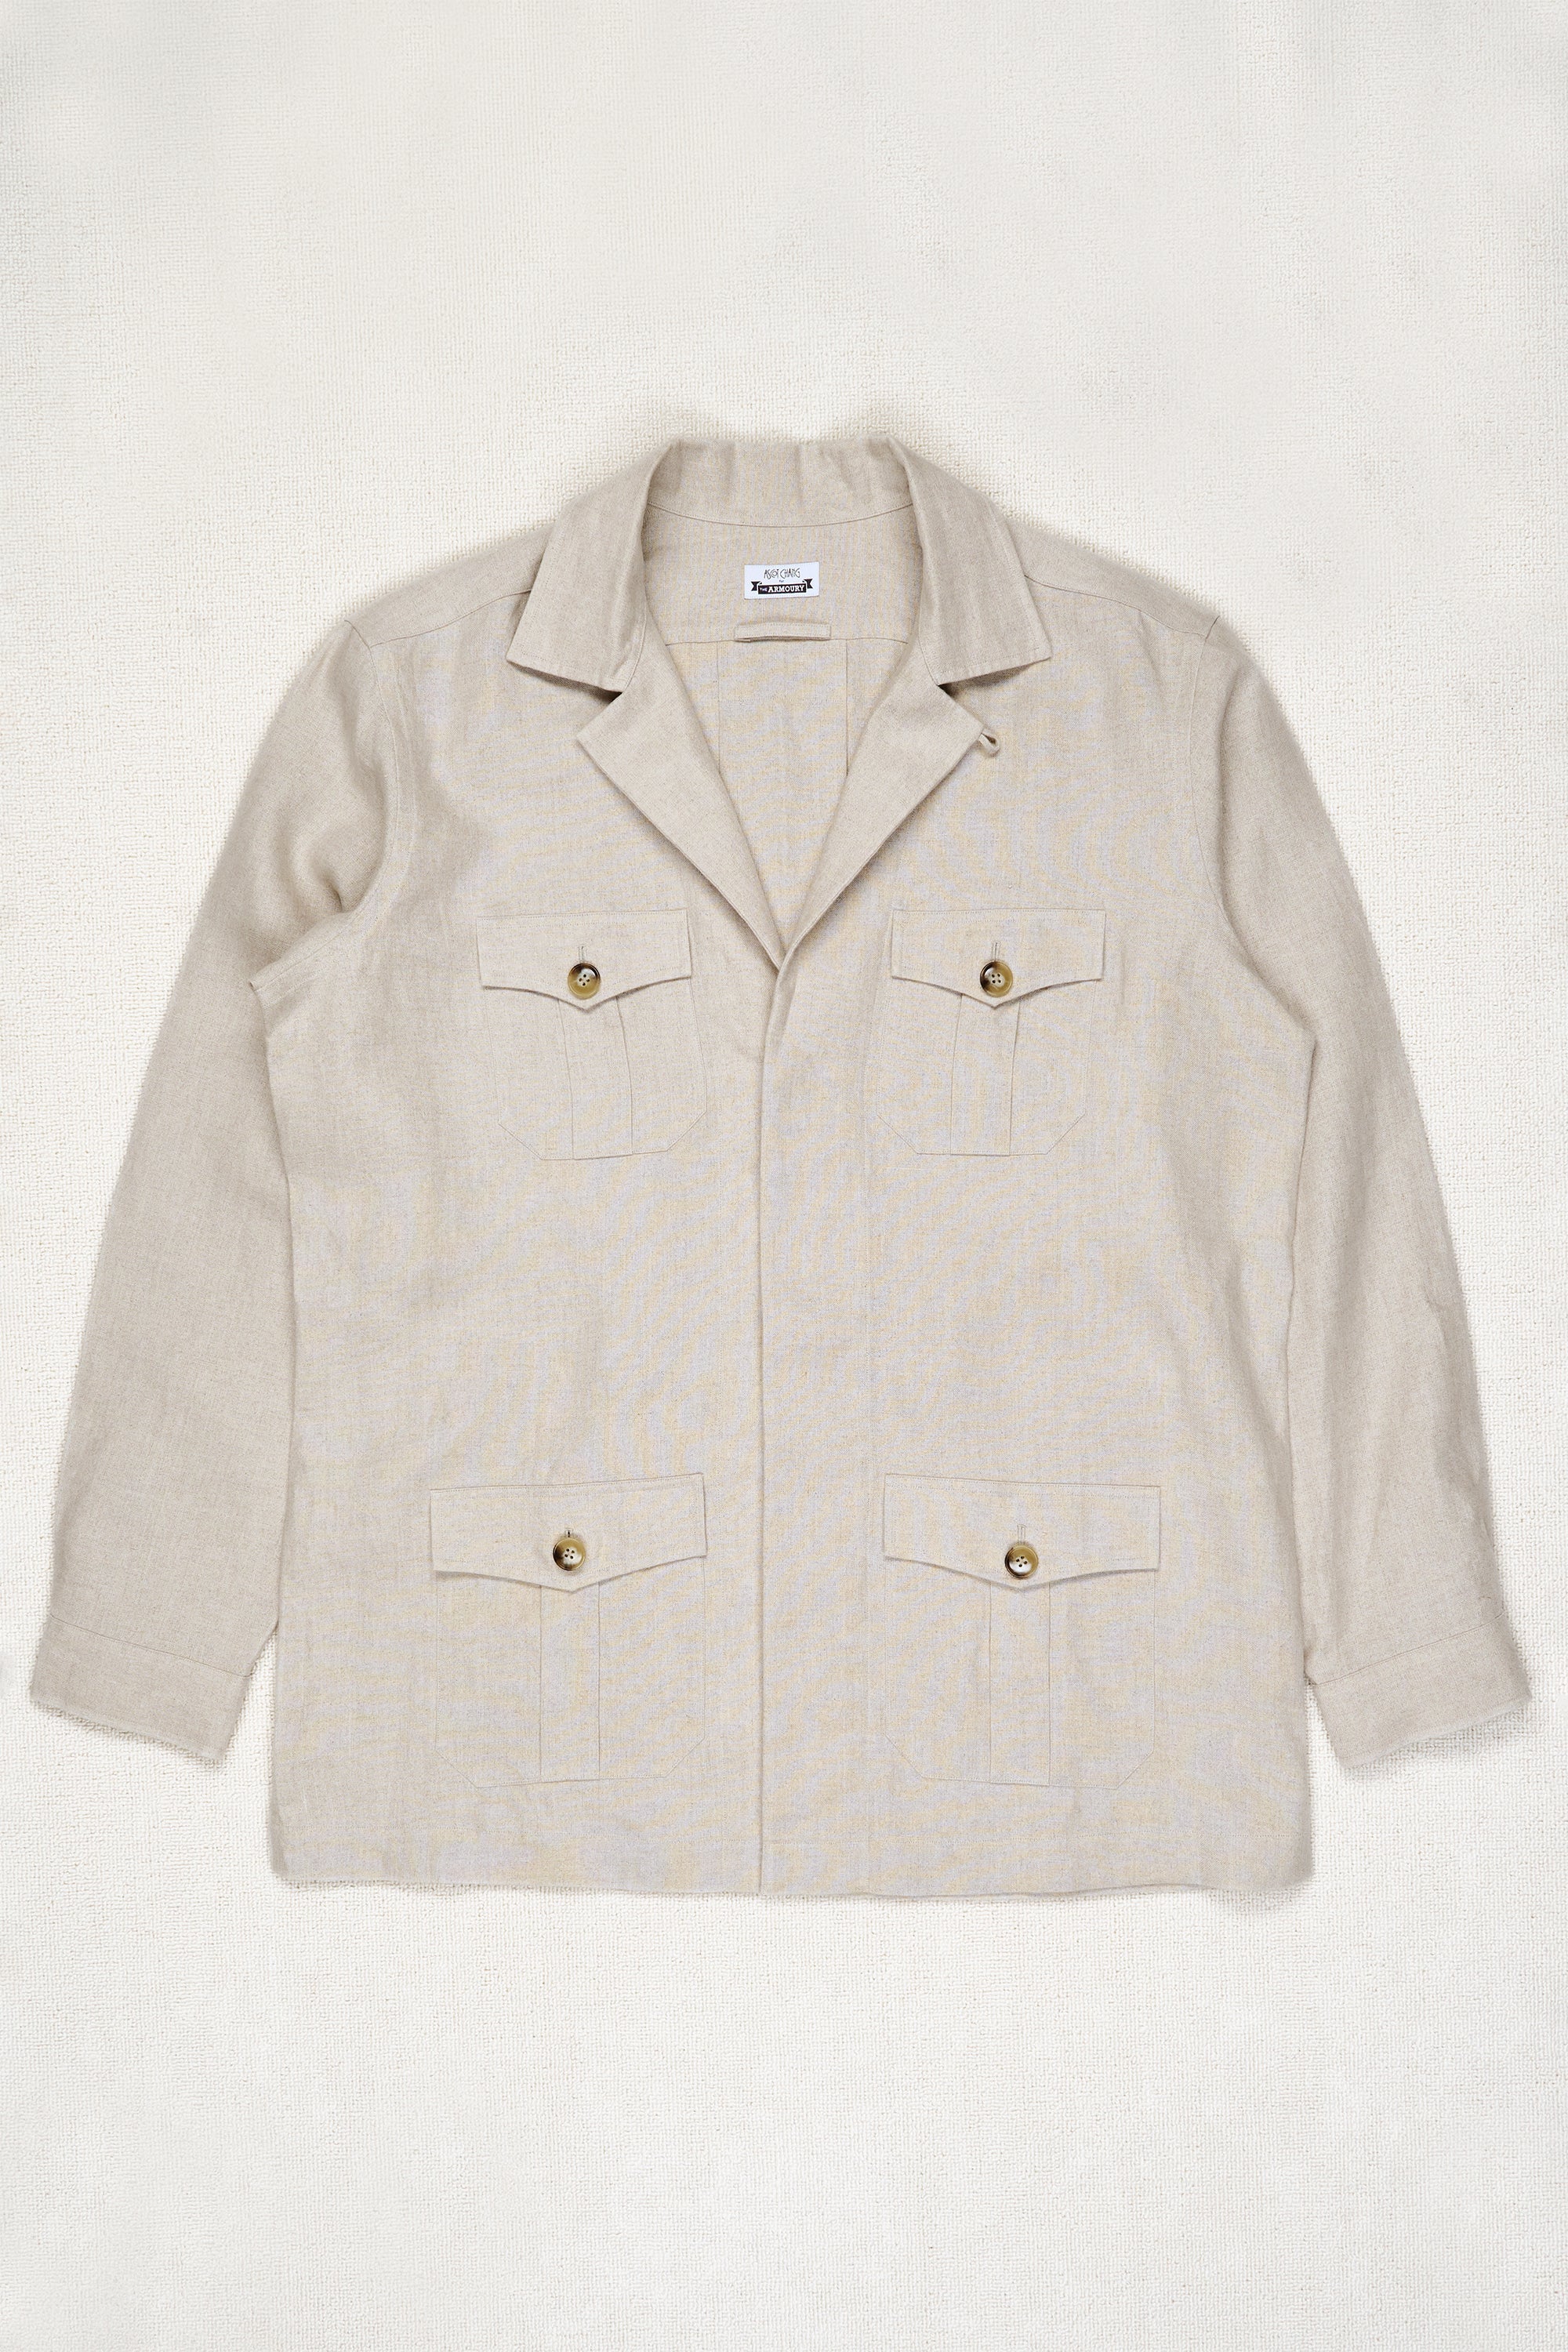 Ascot Chang for The Armoury Beige Linen Safari Jacket *sample*